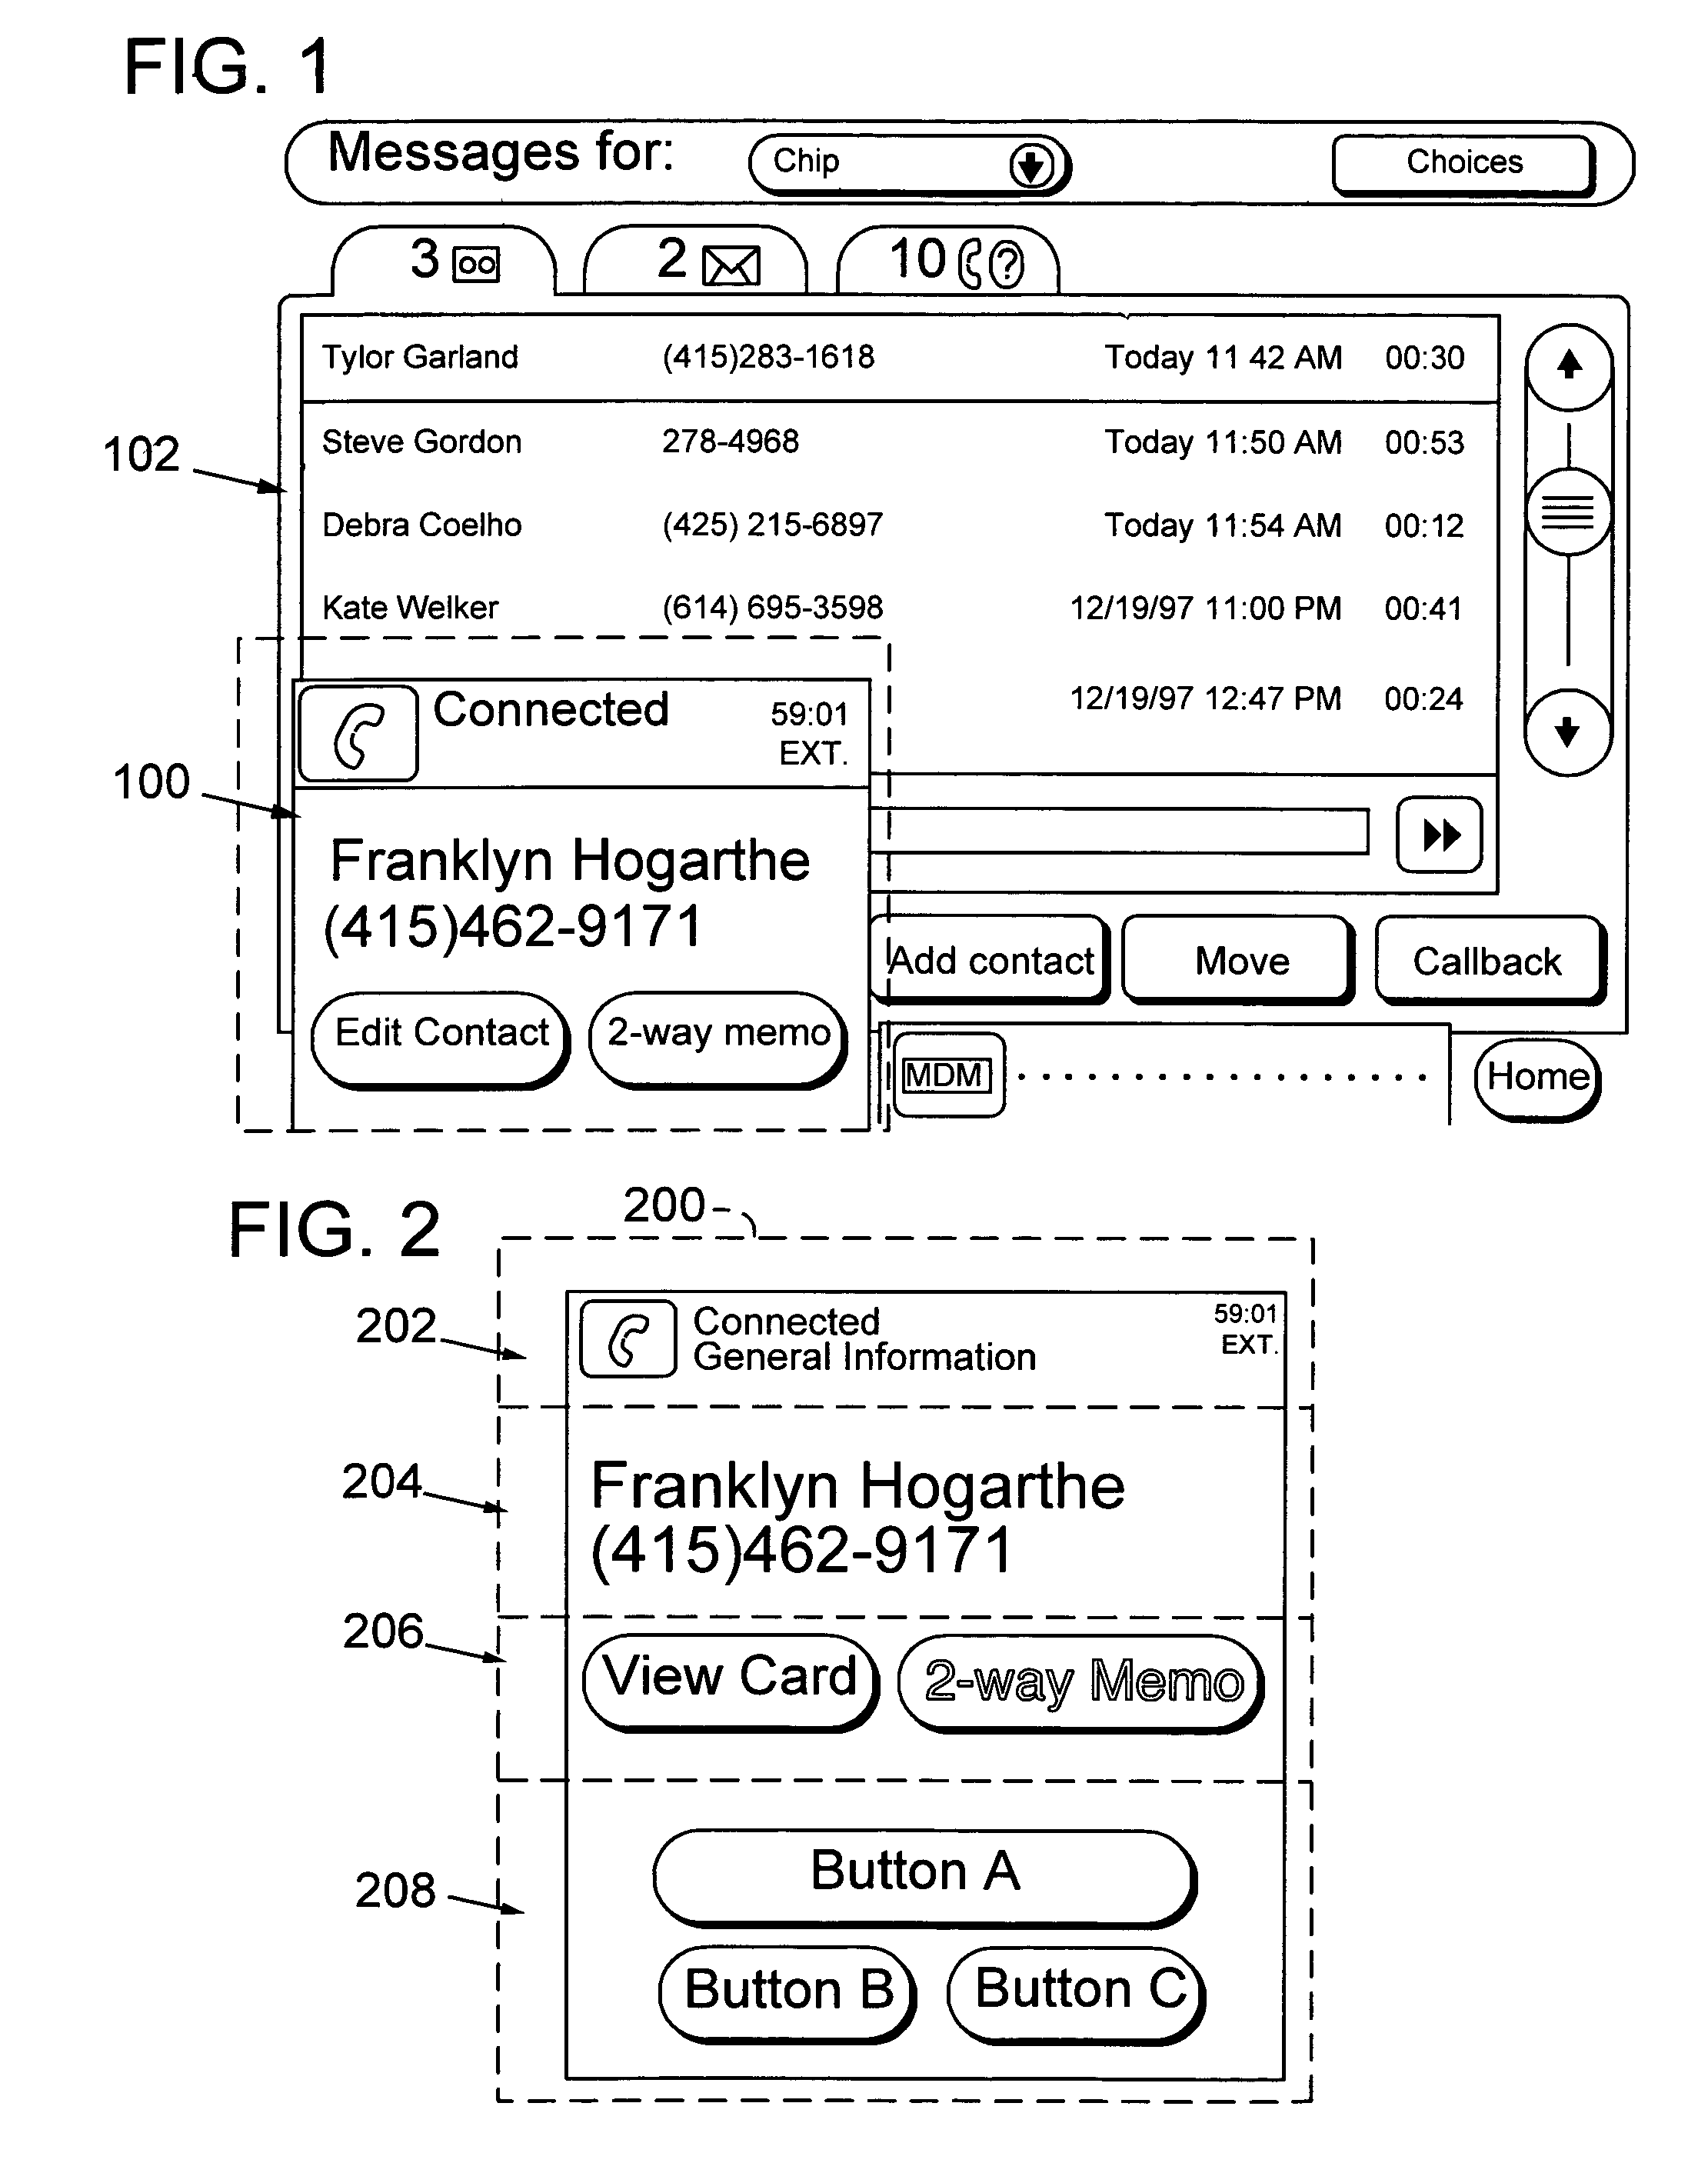 Common visual and functional architecture for presenting and controlling arbitrary telephone line features